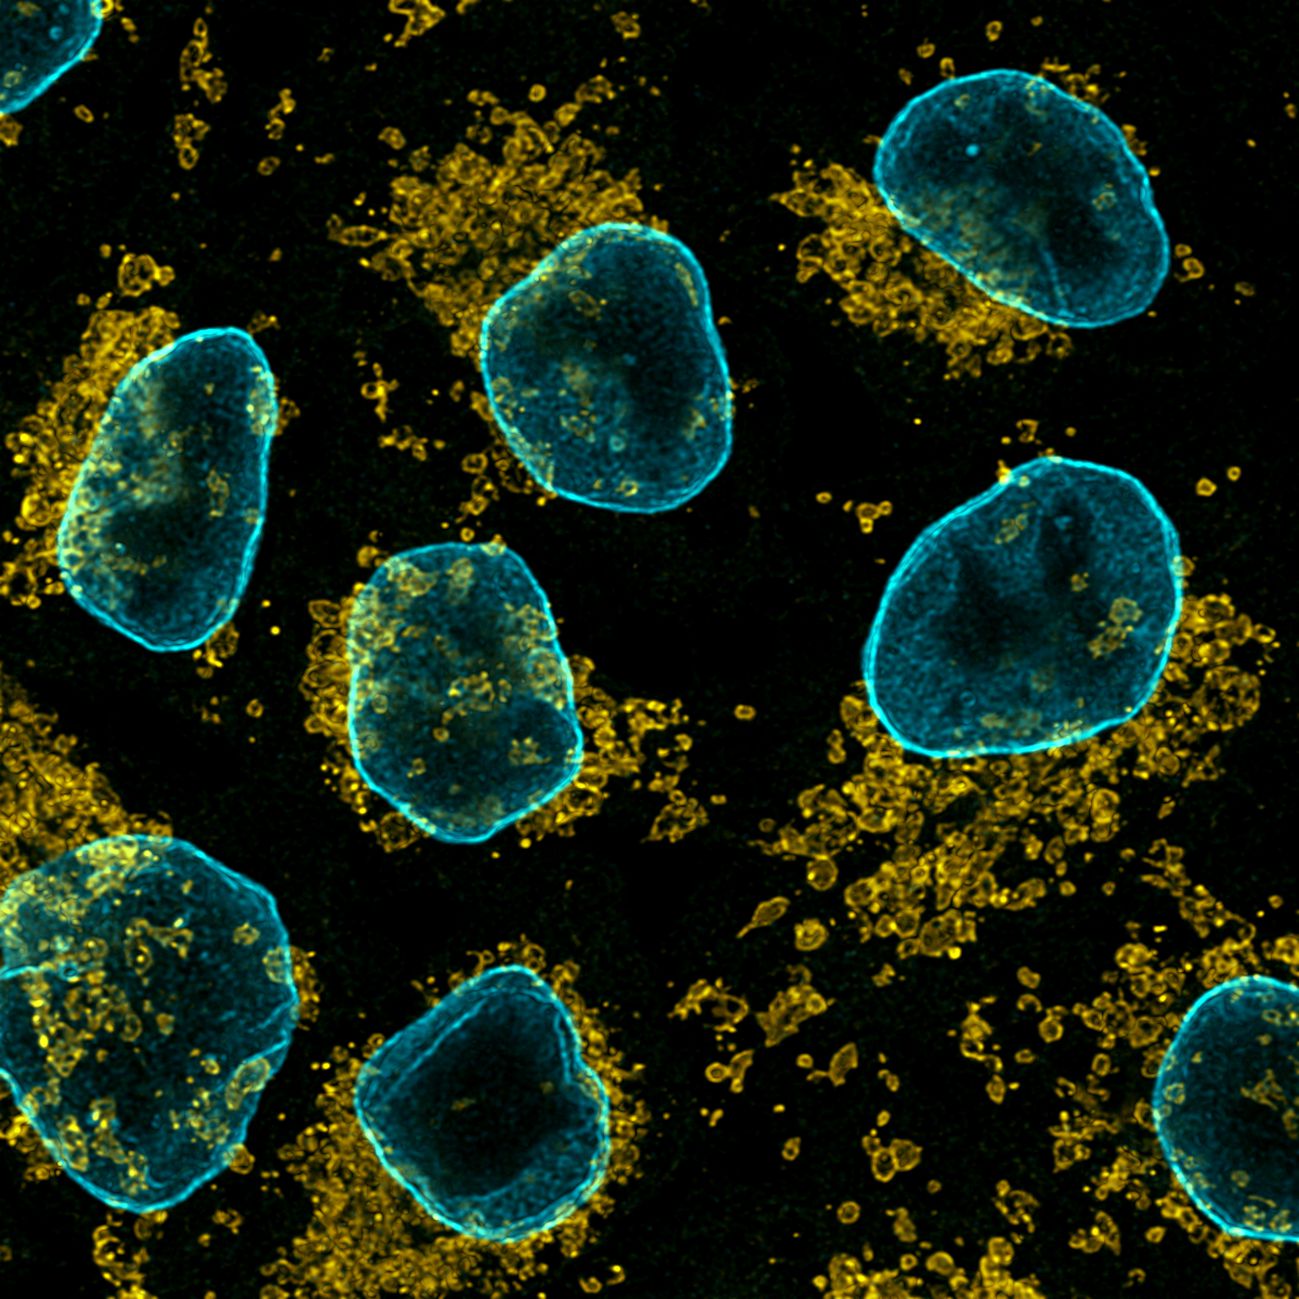 Immunofluorescence of HeLa: PFA-fixed HeLa cells were stained with anti-TOM20 (11802-1-AP) labeled with FlexAble CoraLite® Plus 555 Kit (KFA002, yellow) and anti-Lamin B1 (12987-1-AP) labeled with FlexAble CoraLite® Plus 647 Kit (KFA003, cyan).​ Confocal images were acquired with a 100x oil objective and post-processed. Images were recorded at the Core Facility Bioimaging at the Biomedical Center, LMU Munich.